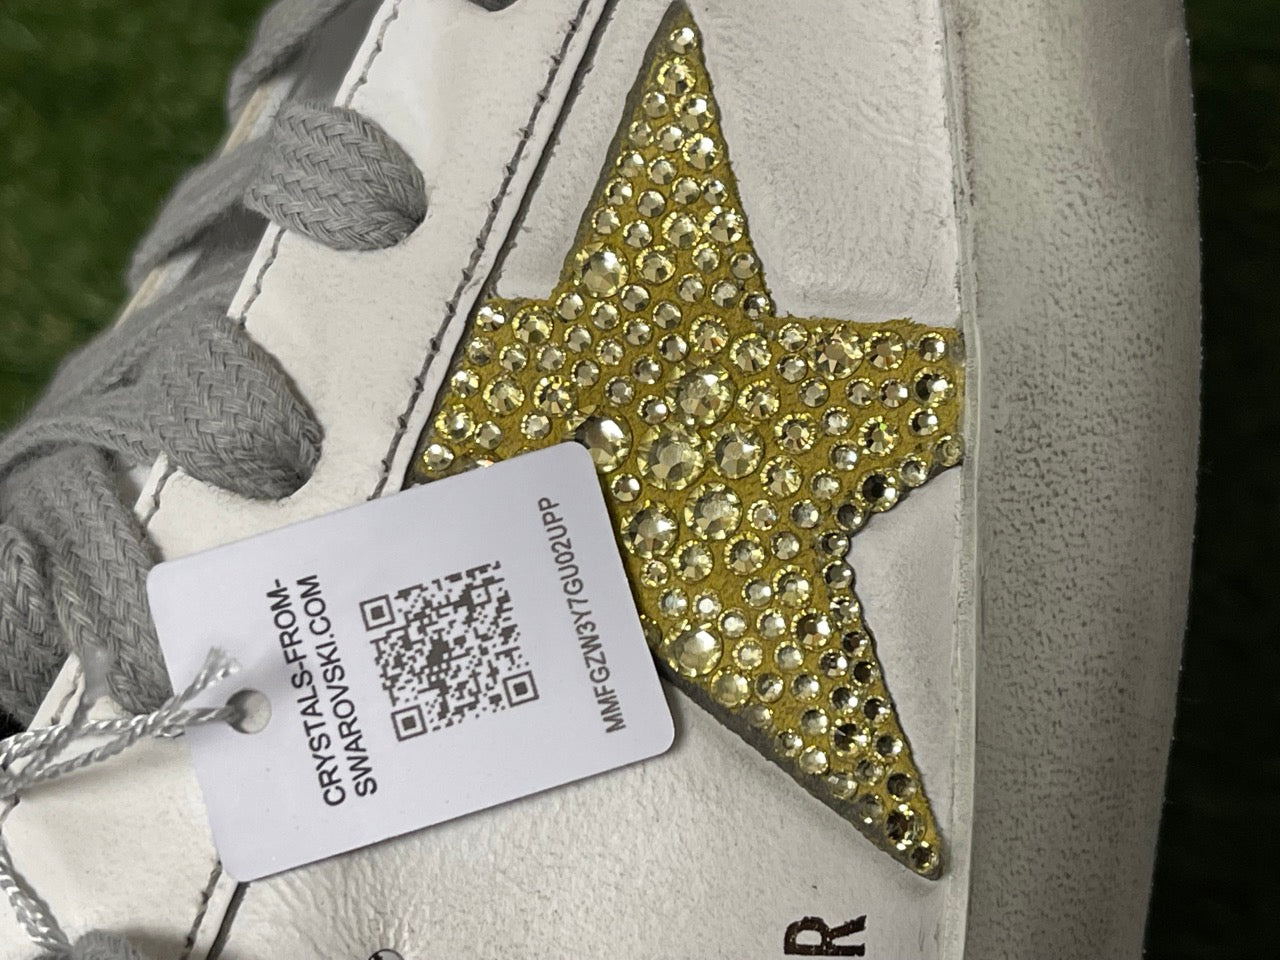 Women's Star Bag in silver leather with Swarovski crystal star